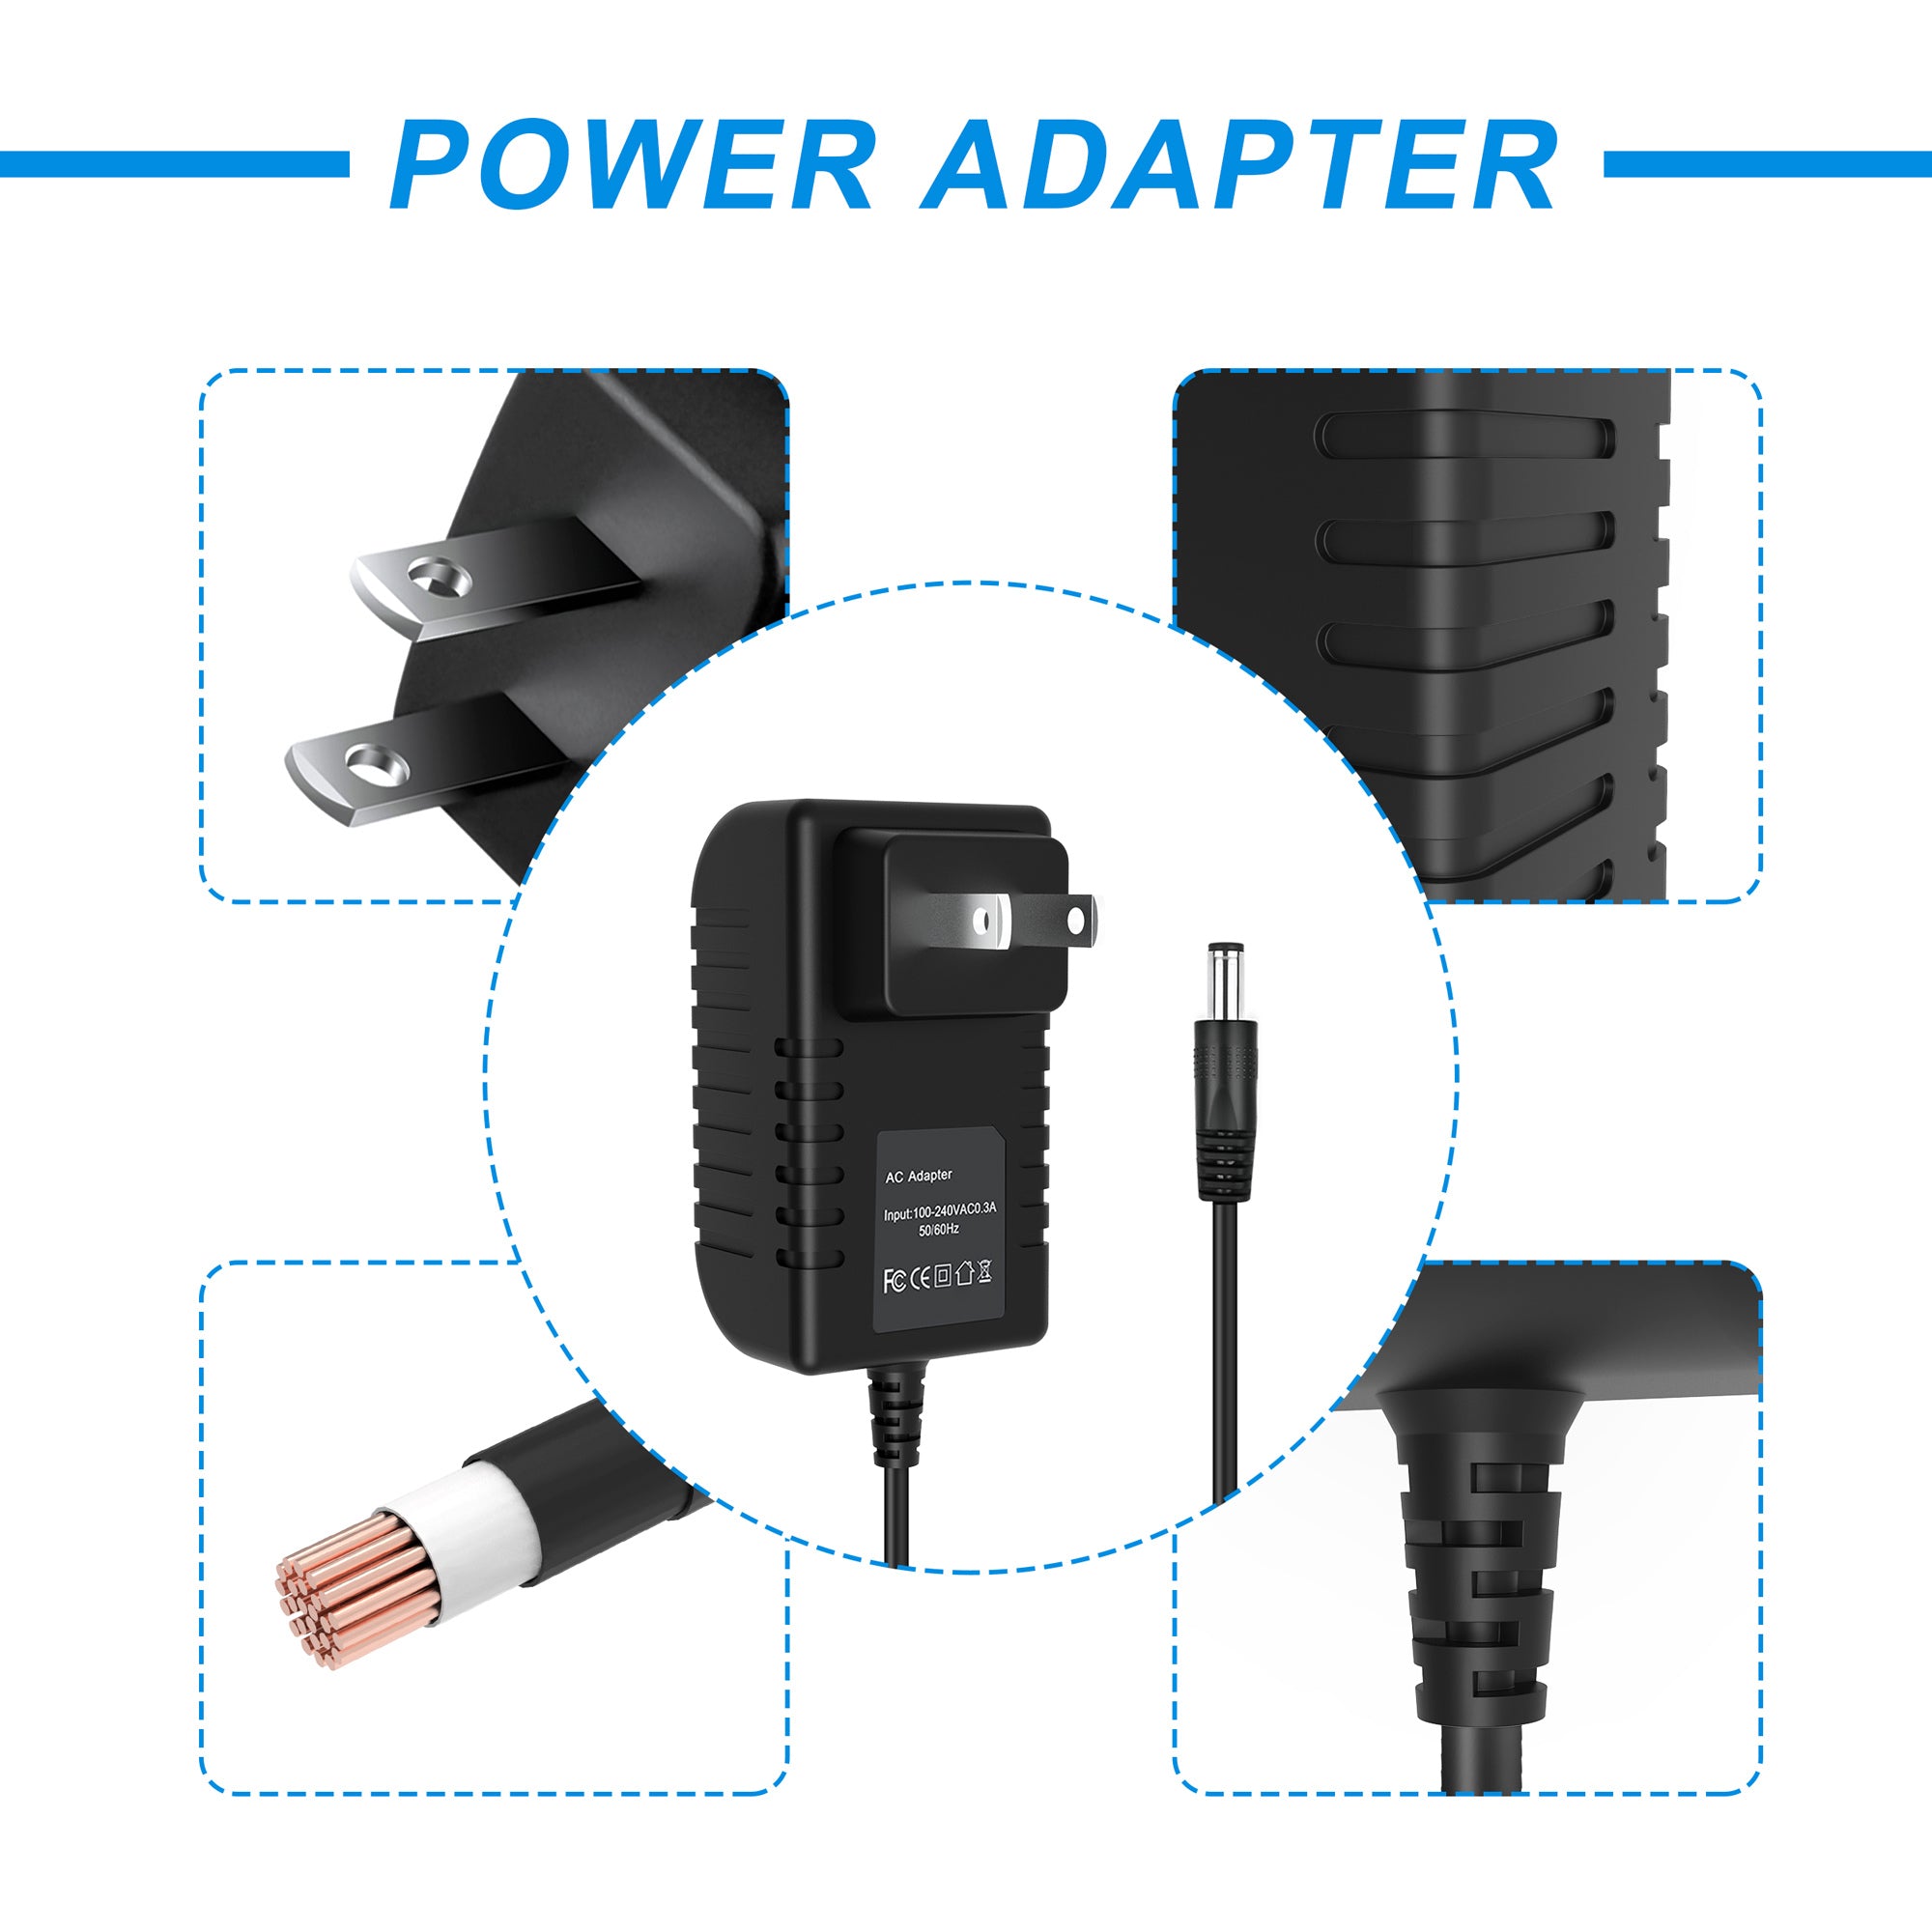 AbleGrid AC/DC Adapter Compatible with Toshiba SD-P1750SN Portable DVD Player Laptop Notebook Power Supply Cord Cable PS Battery Charger Input: 100 - 240 VAC 50/60Hz Worldwide Voltage Use PSU